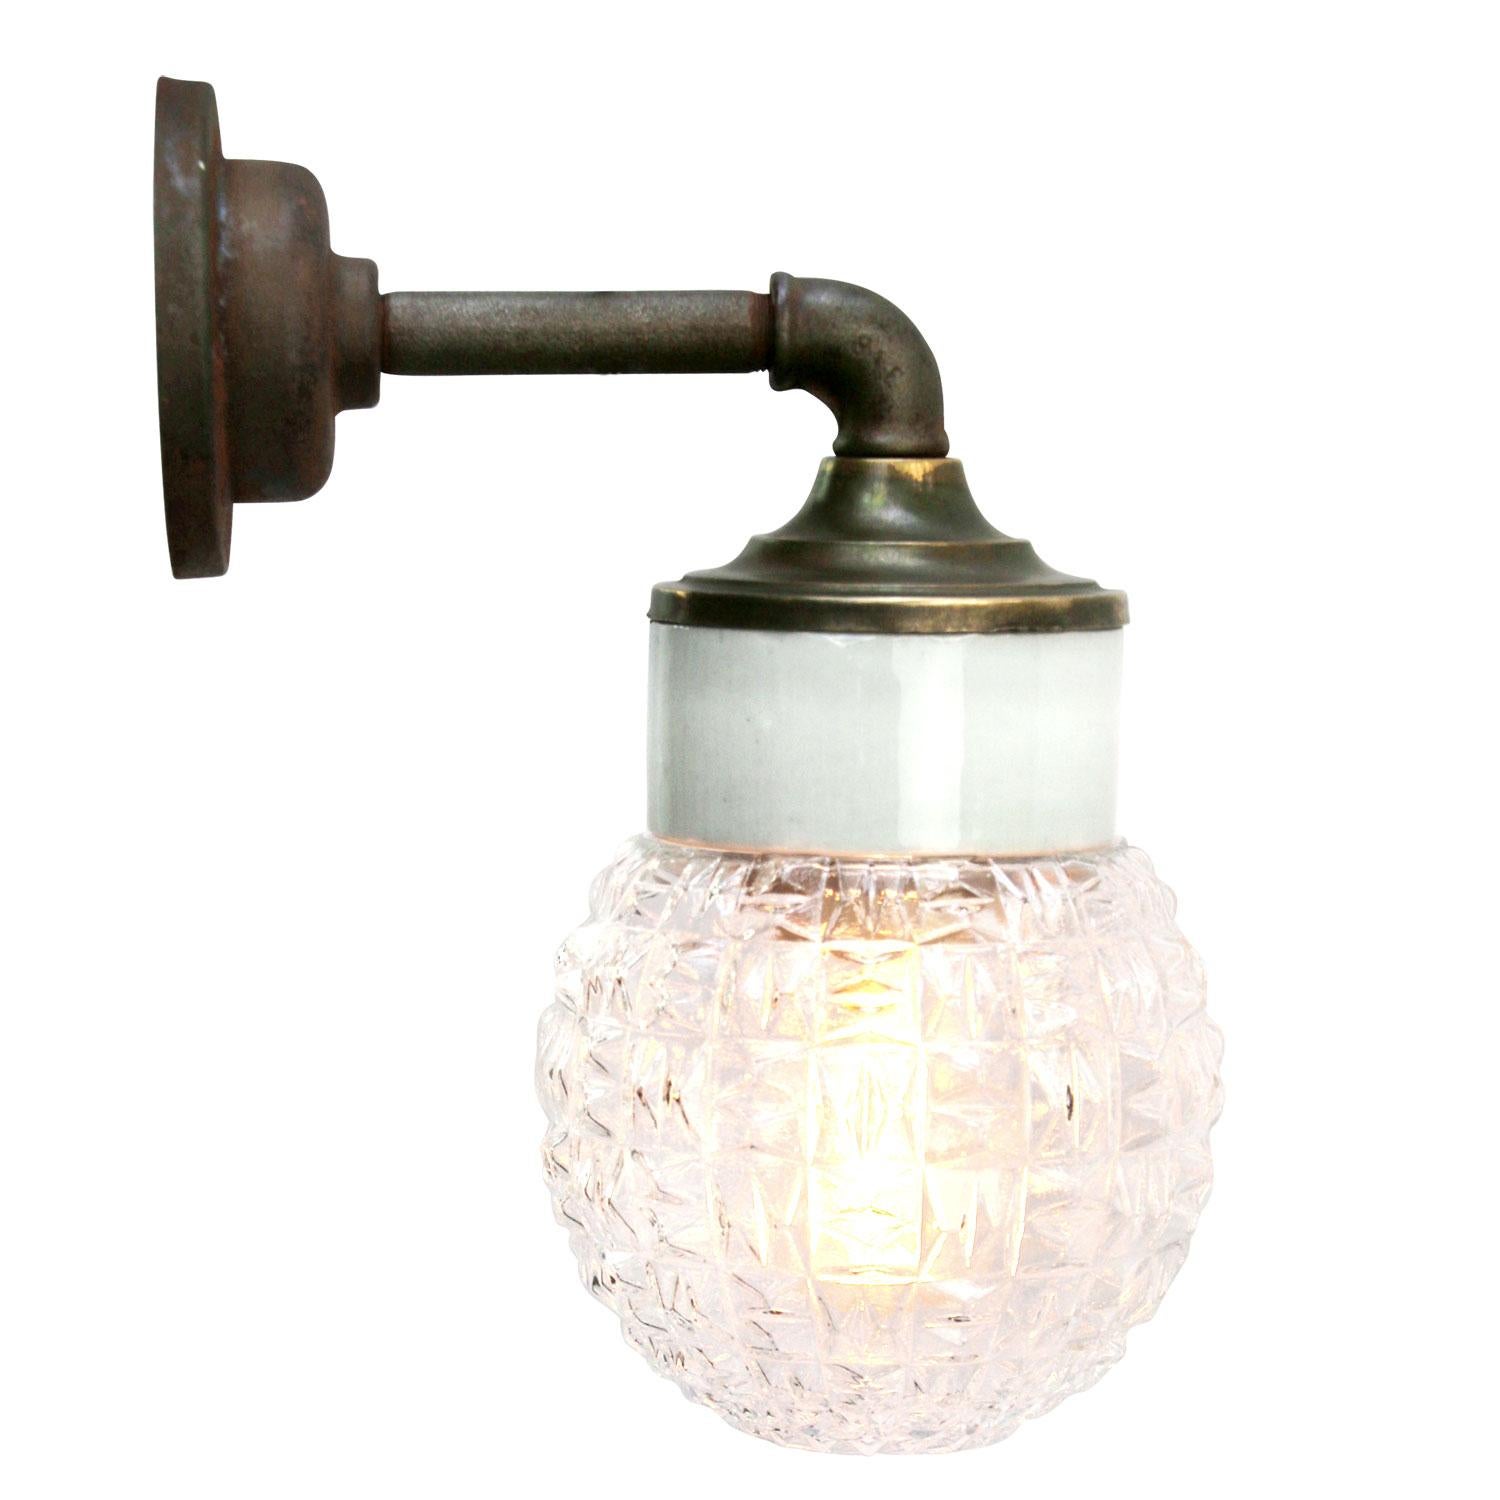 Porcelain industrial wall lamp.
White porcelain, cast iron, brass and clear glass.
2 conductors, no ground.

Diameter wall mount 10.5 cm / 4”

for use inside only

Measures: Weight: 2.05 kg / 4.5 lb

Priced per individual item. All lamps have been